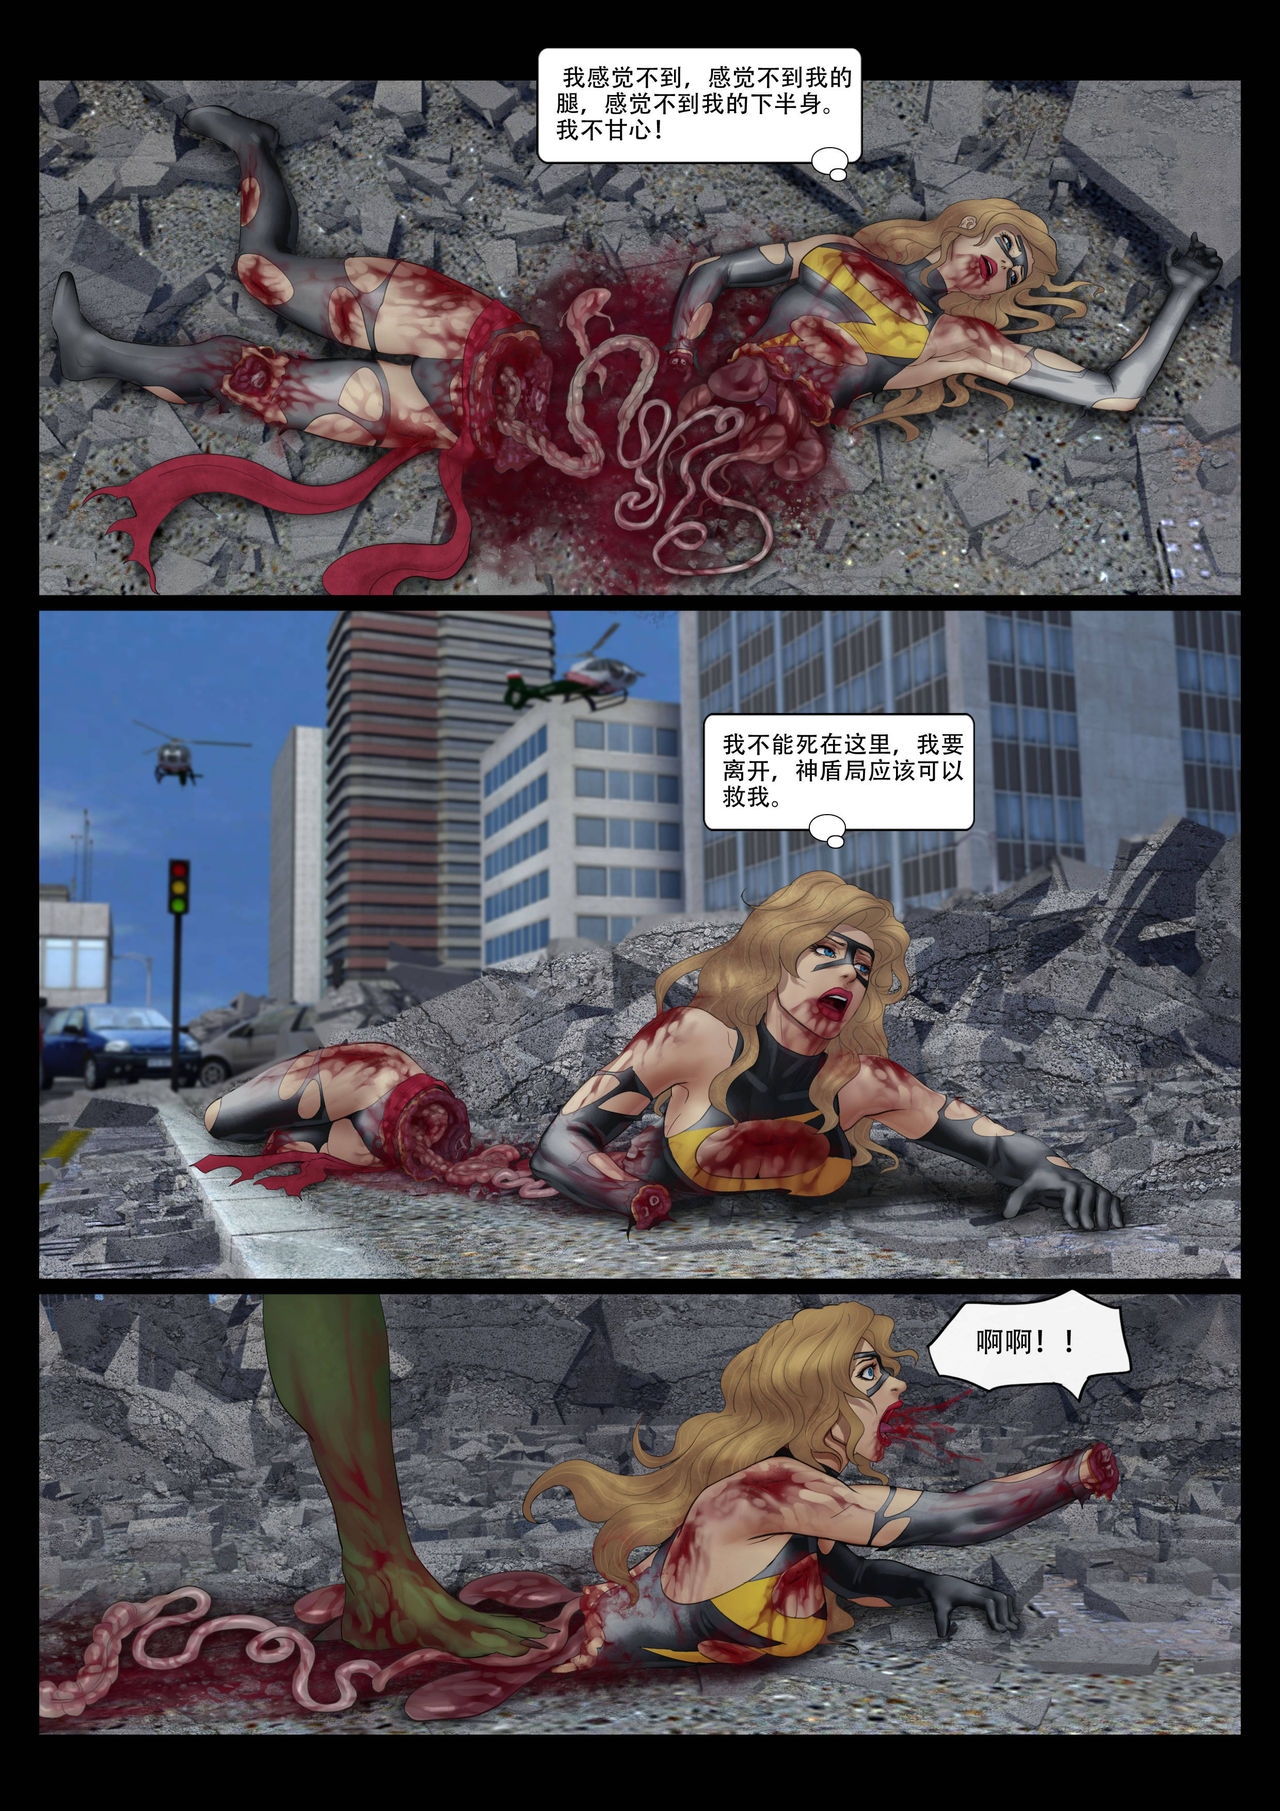 The Nightmare of Avengers Chapter 0 32